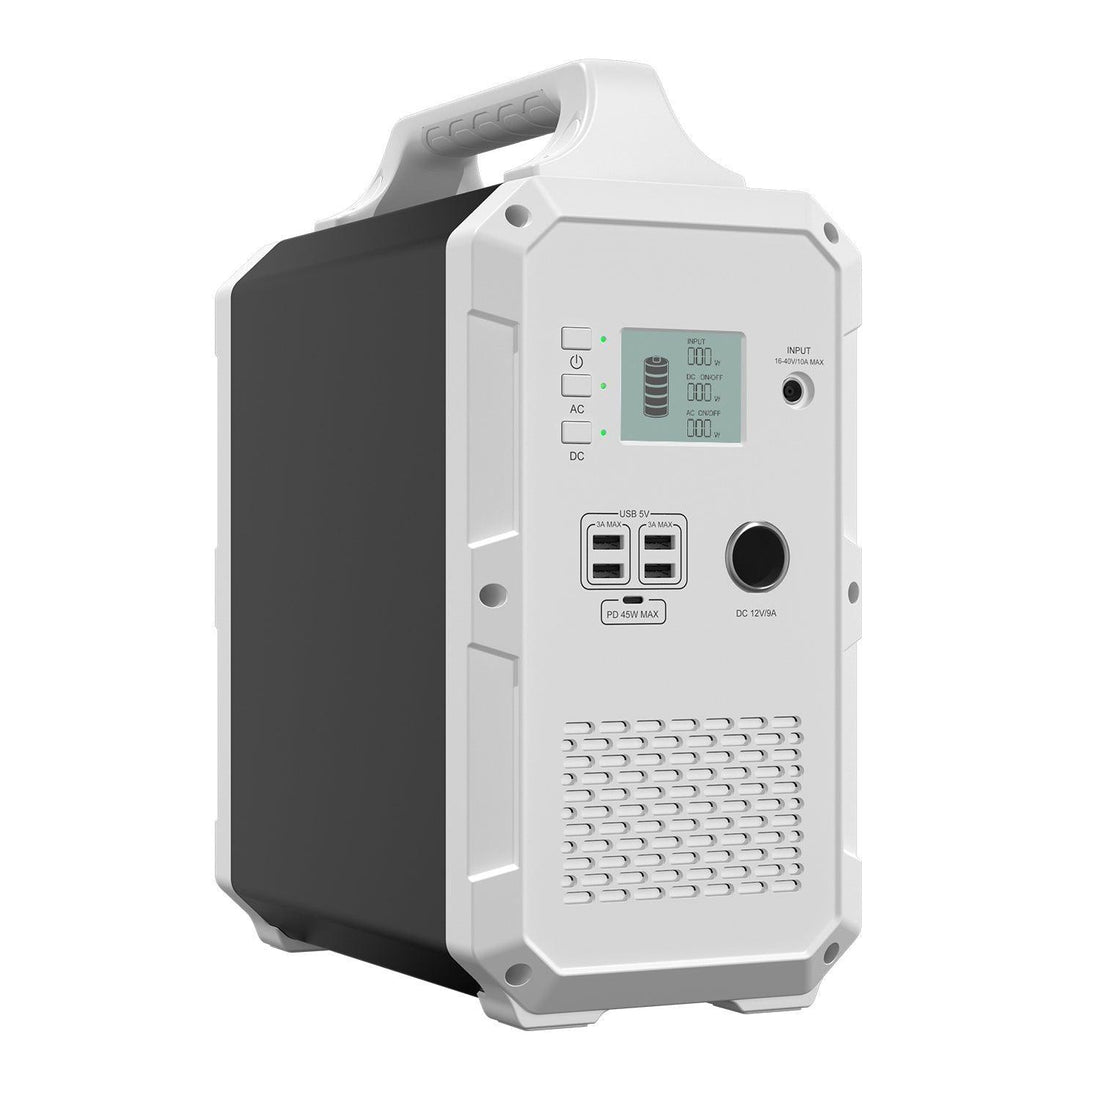 Build a PC for BLUETTI PowerOak EB70 Portable Power Station 1000W 716Wh  with compatibility check and compare prices in France: Paris, Marseille,  Lisle on NerdPart